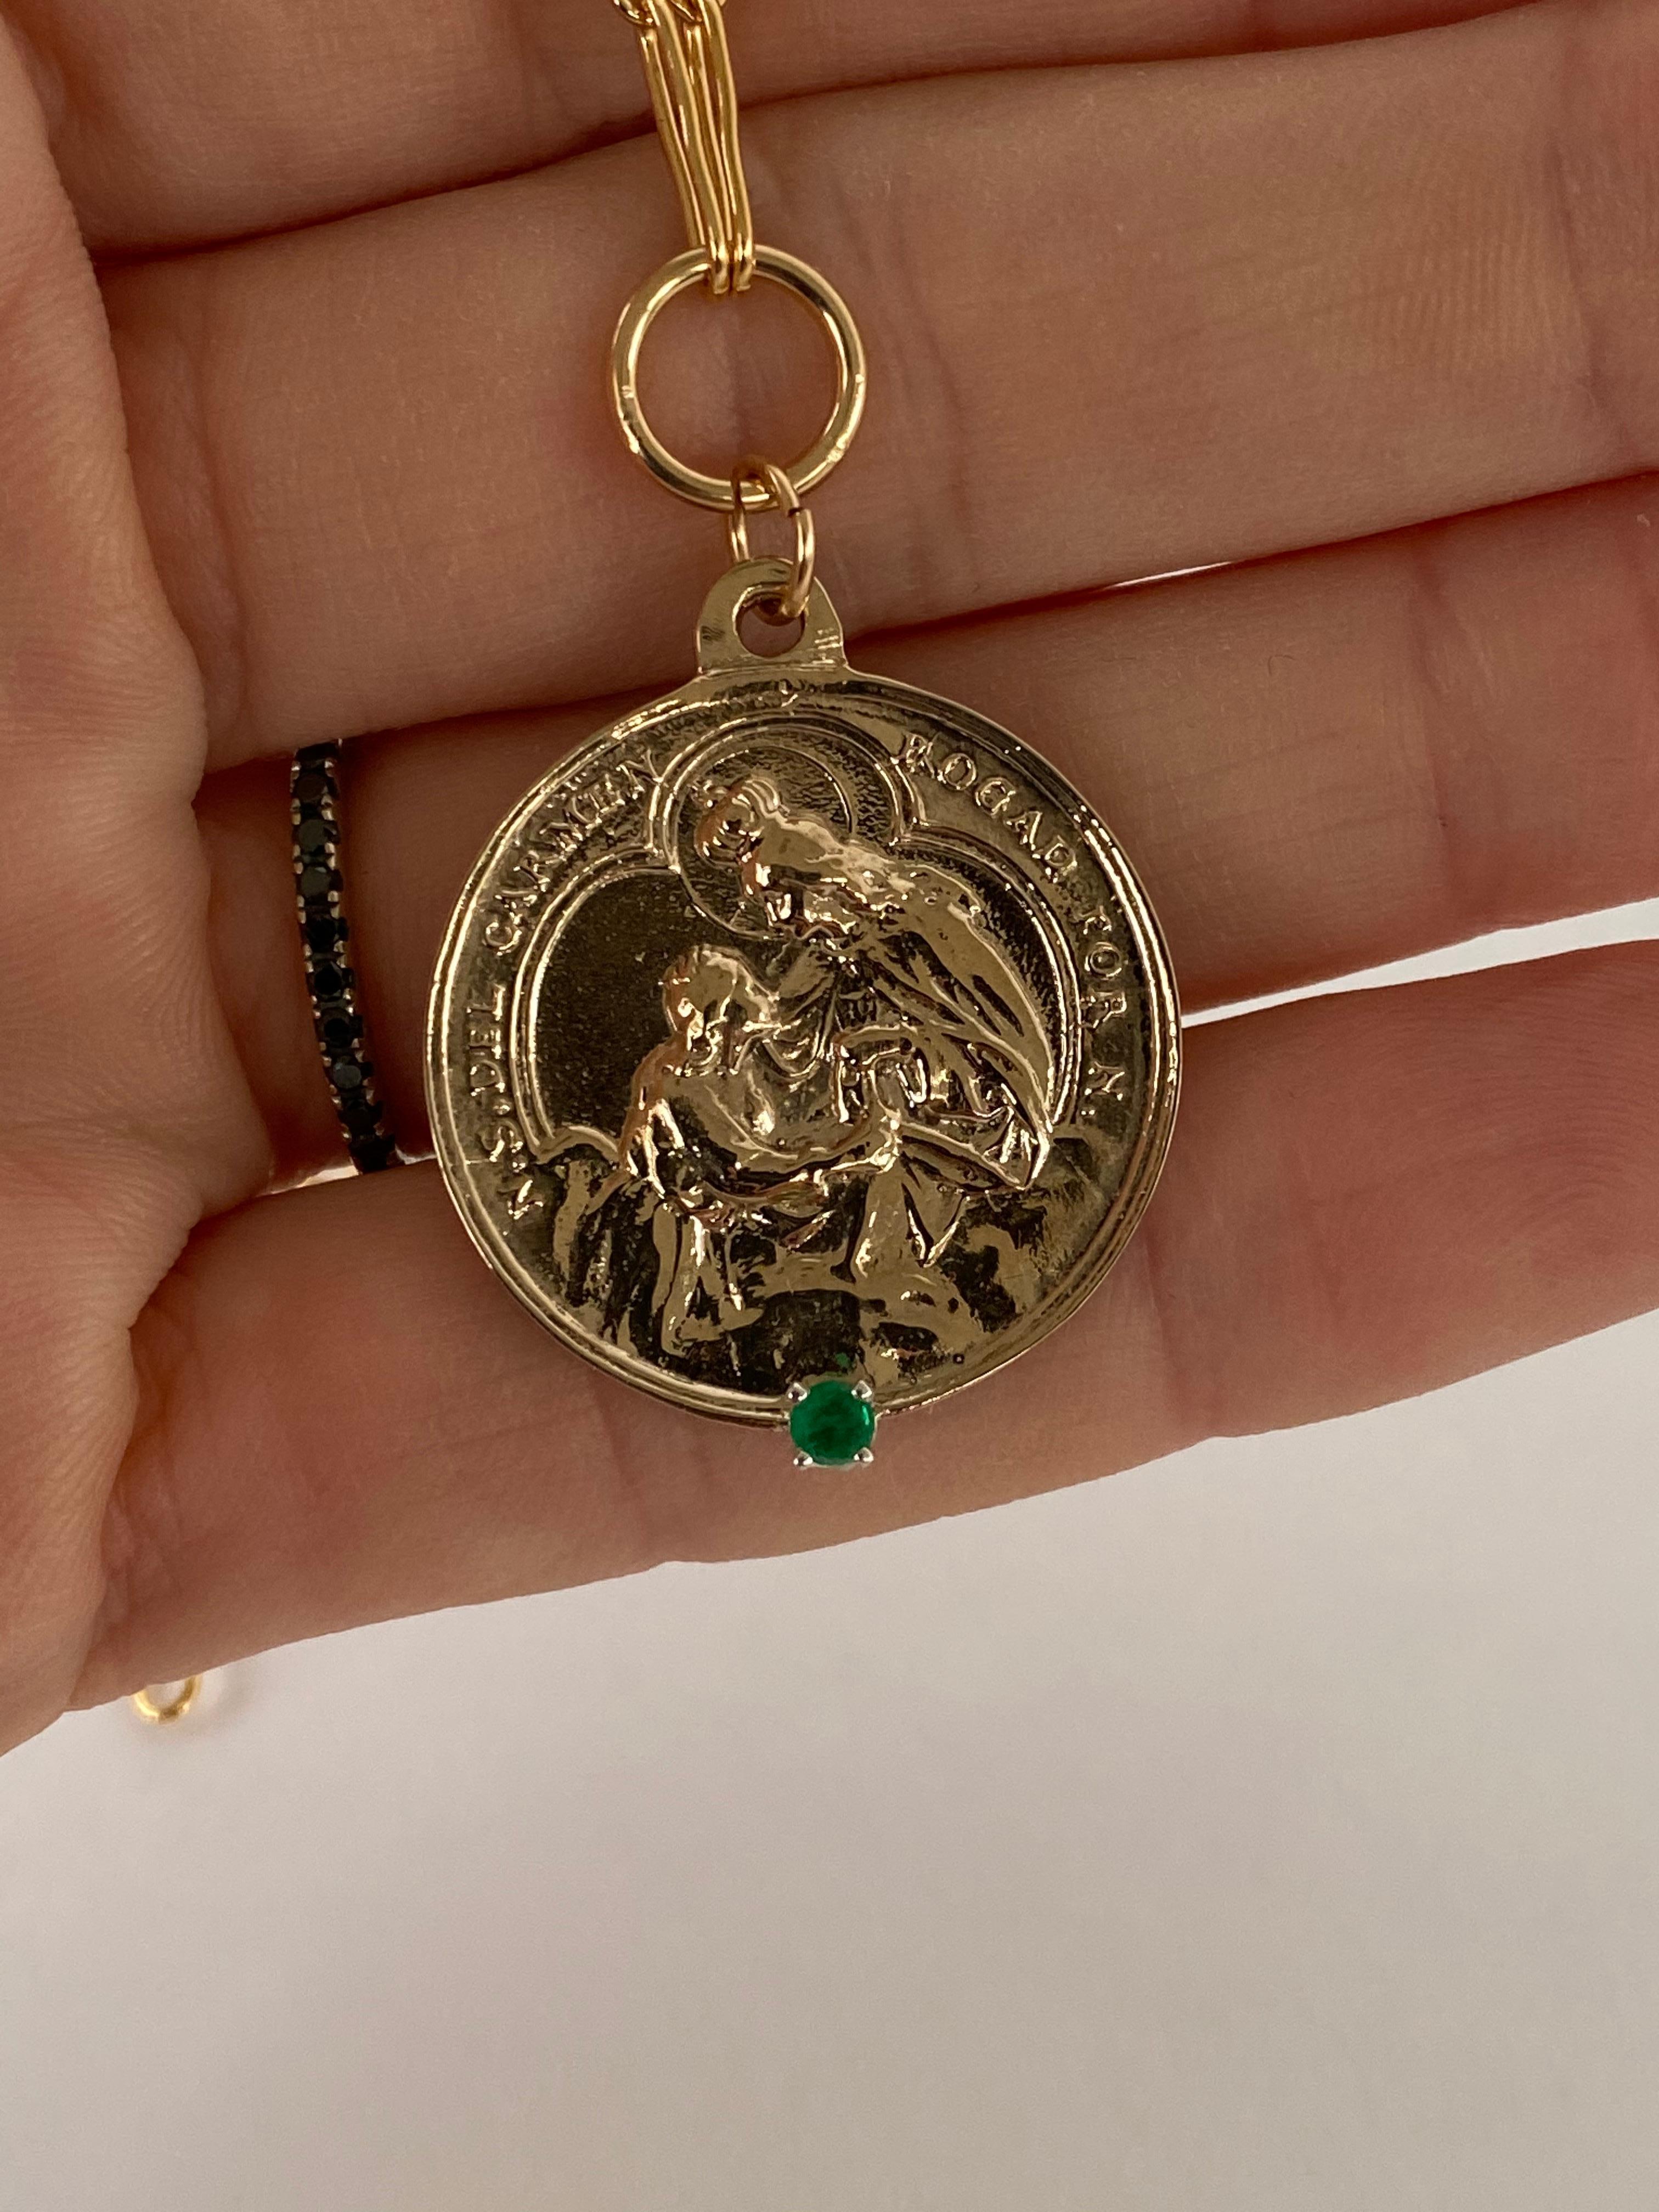 Emerald set in Silver Prong on a Virgin Mother Mary Medal Round Coin Pendant in Bronze with a Gold Filled Chain Necklace J Dauphin

The Chain is 23' long but can be made shorter or longer on request.

Symbols or medals can become a powerful tool in